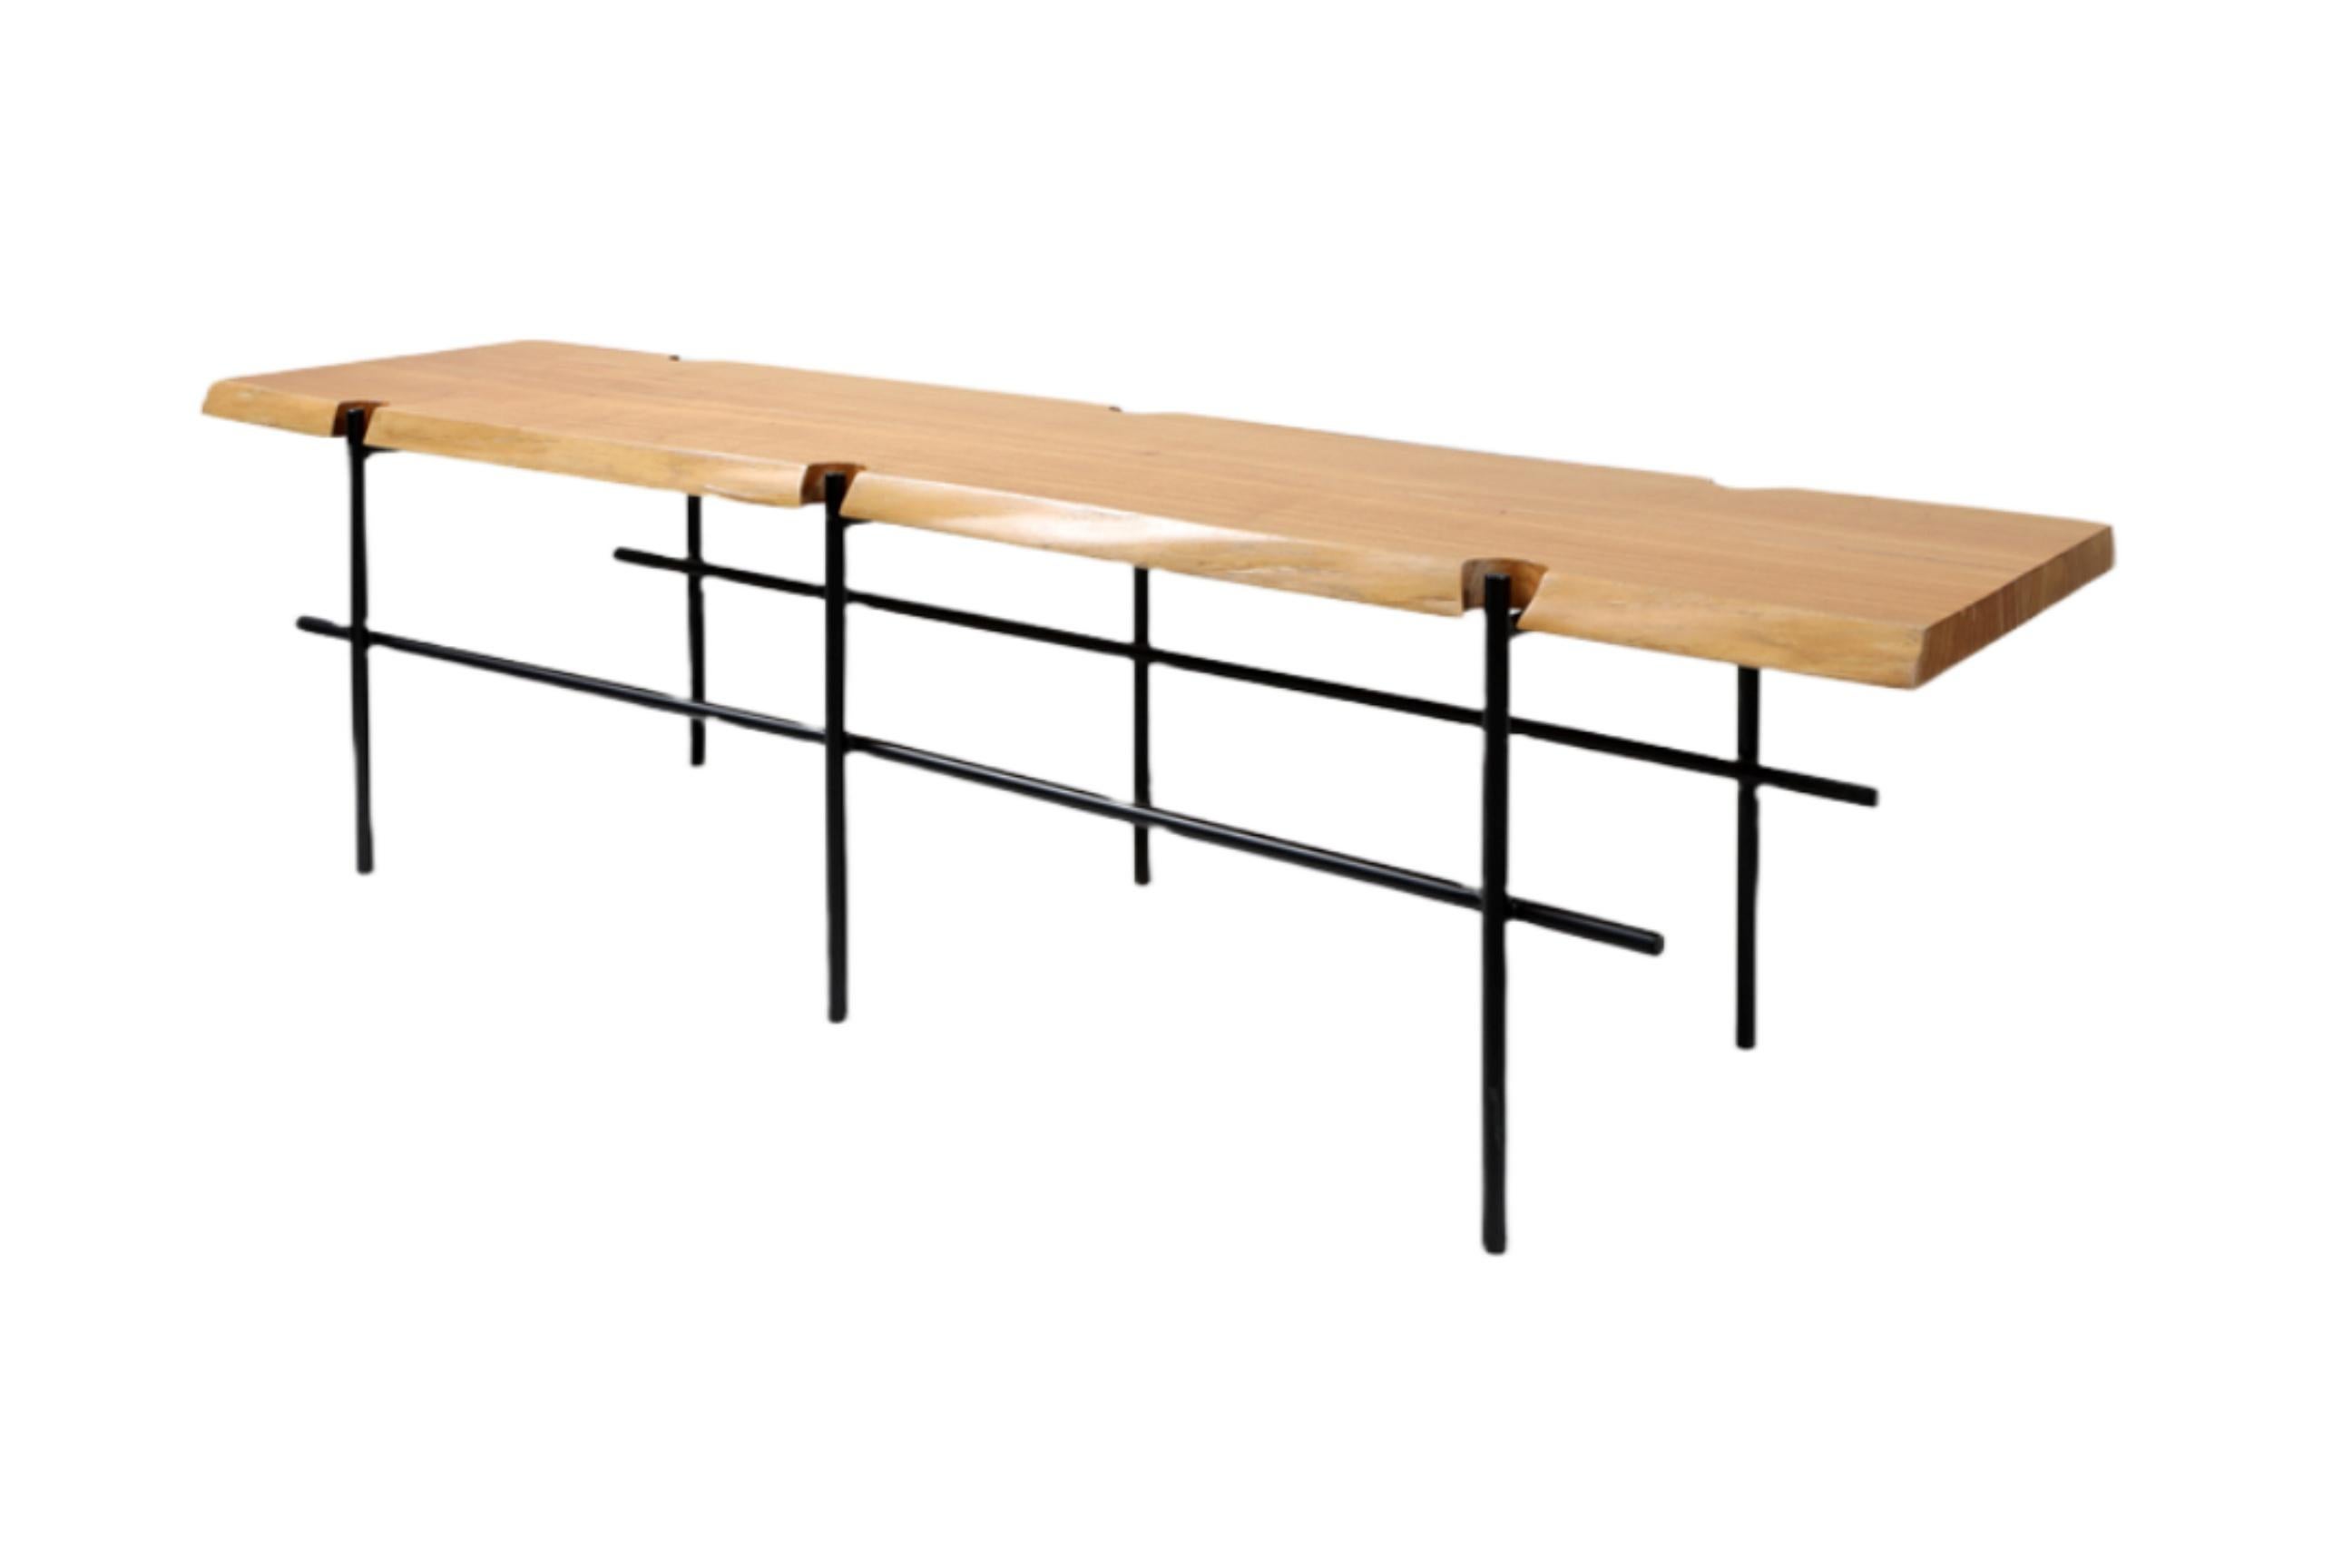 The design Construction bench is inspired in the improvised structures used in non-professional constructions such as scaffolding made of reclaimed materials from the construction site, very used in South America. The solid cinamomo wood top is